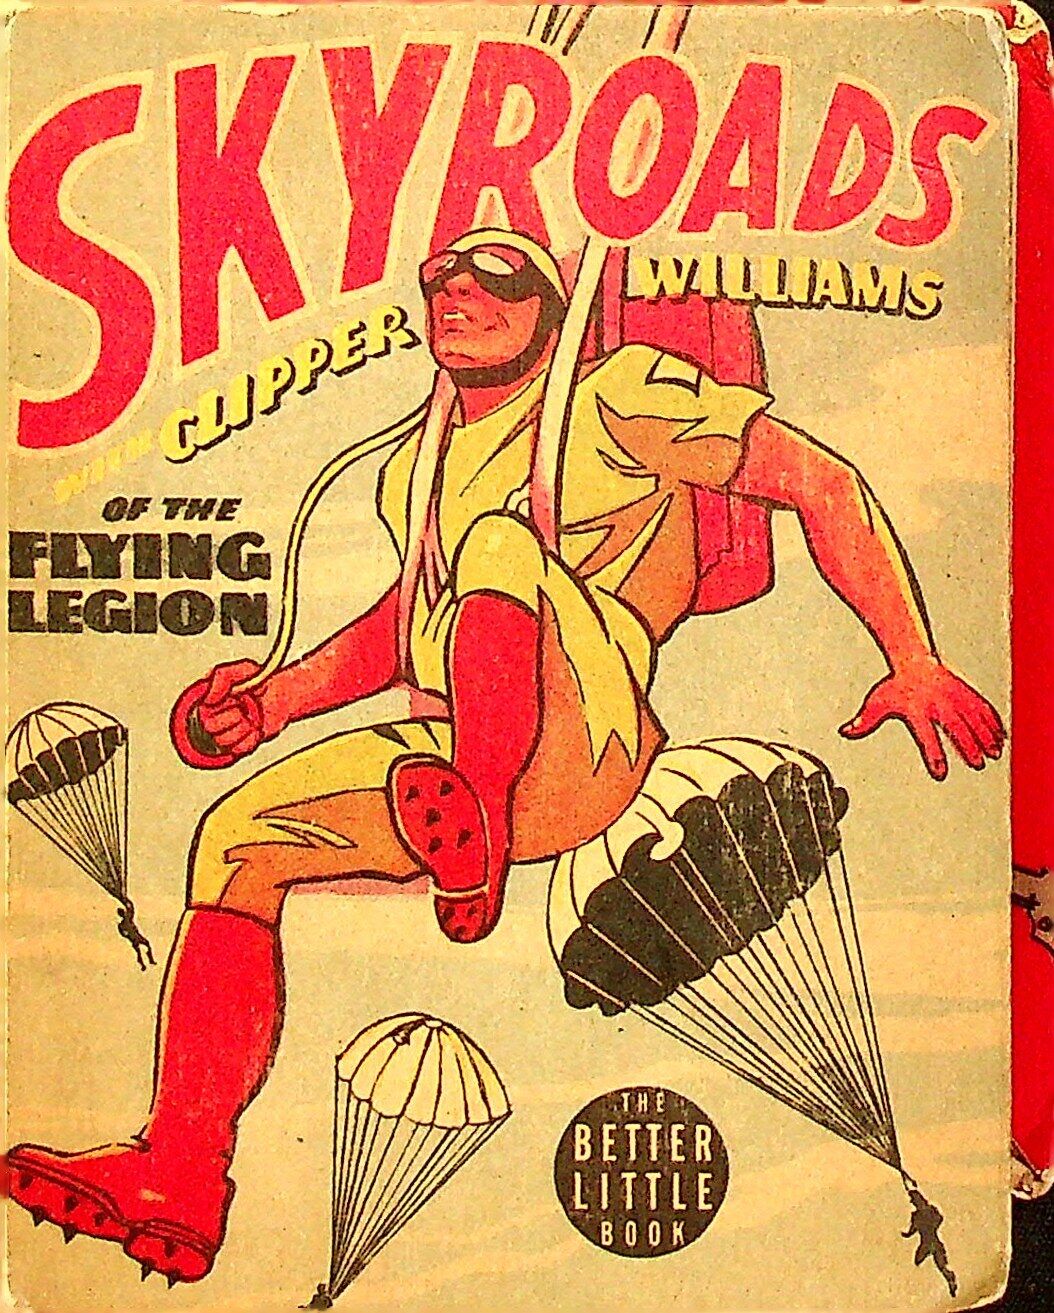 Skyroads with Clipper Williams of the Flying Legion #1439 FN 1938